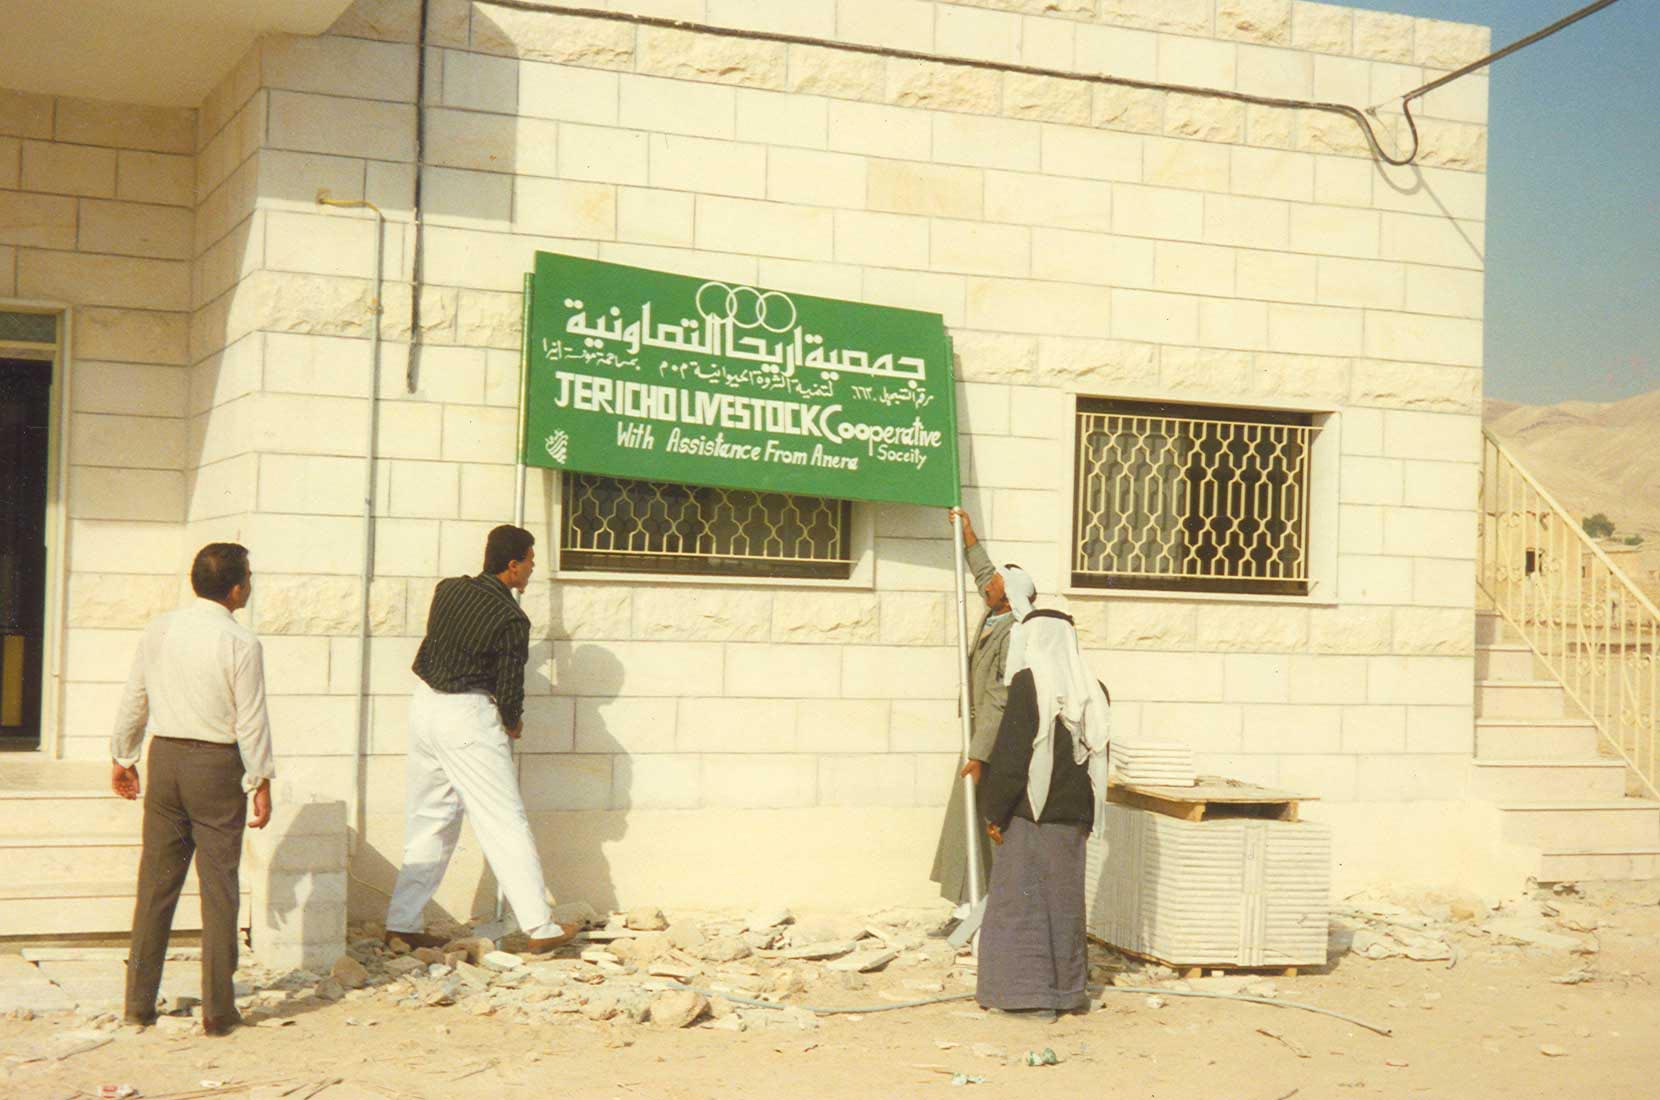 Anera supported this livestock cooperative in Jericho, helping them reclaim lands in the 1980s.